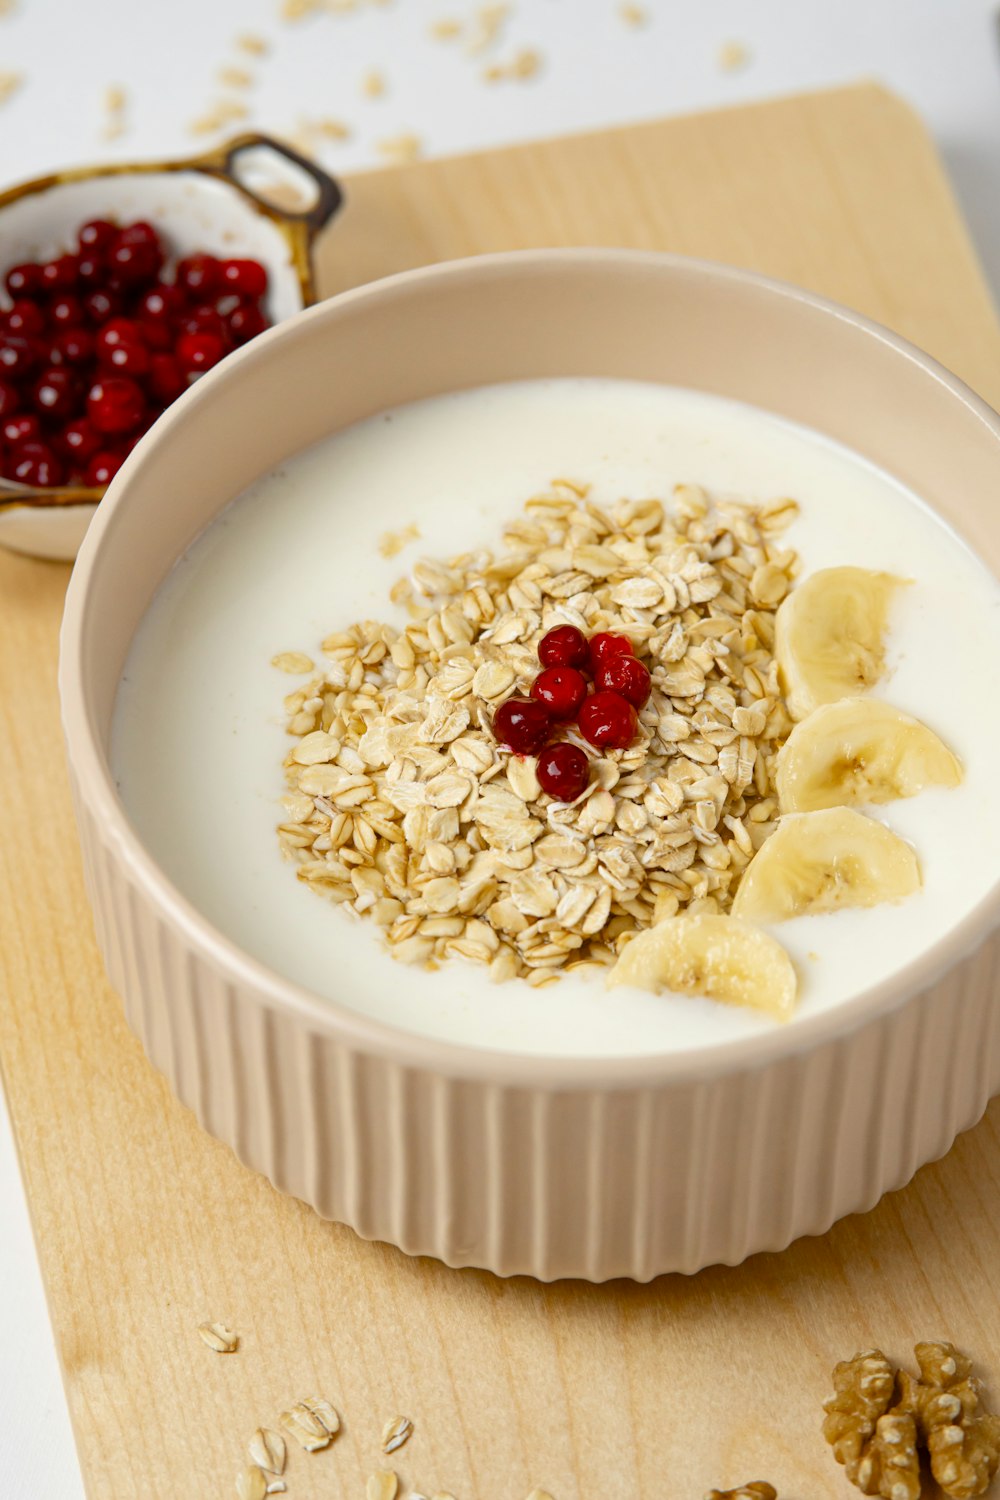 a bowl of oatmeal with banana slices and cherries